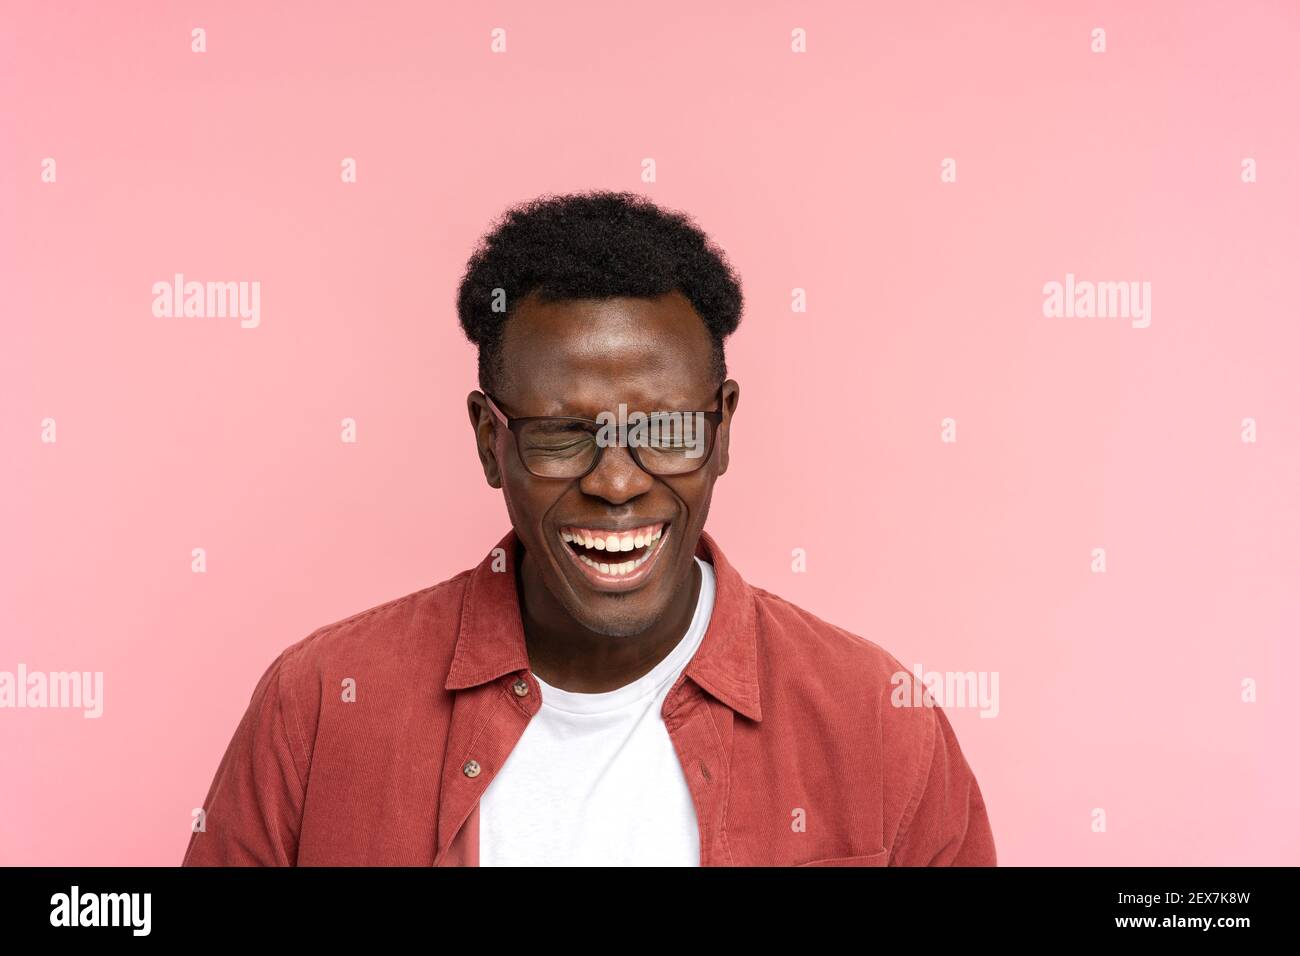 Laughing positive young African American man in red shirt in good mood with closed eyes, isolated. Stock Photo